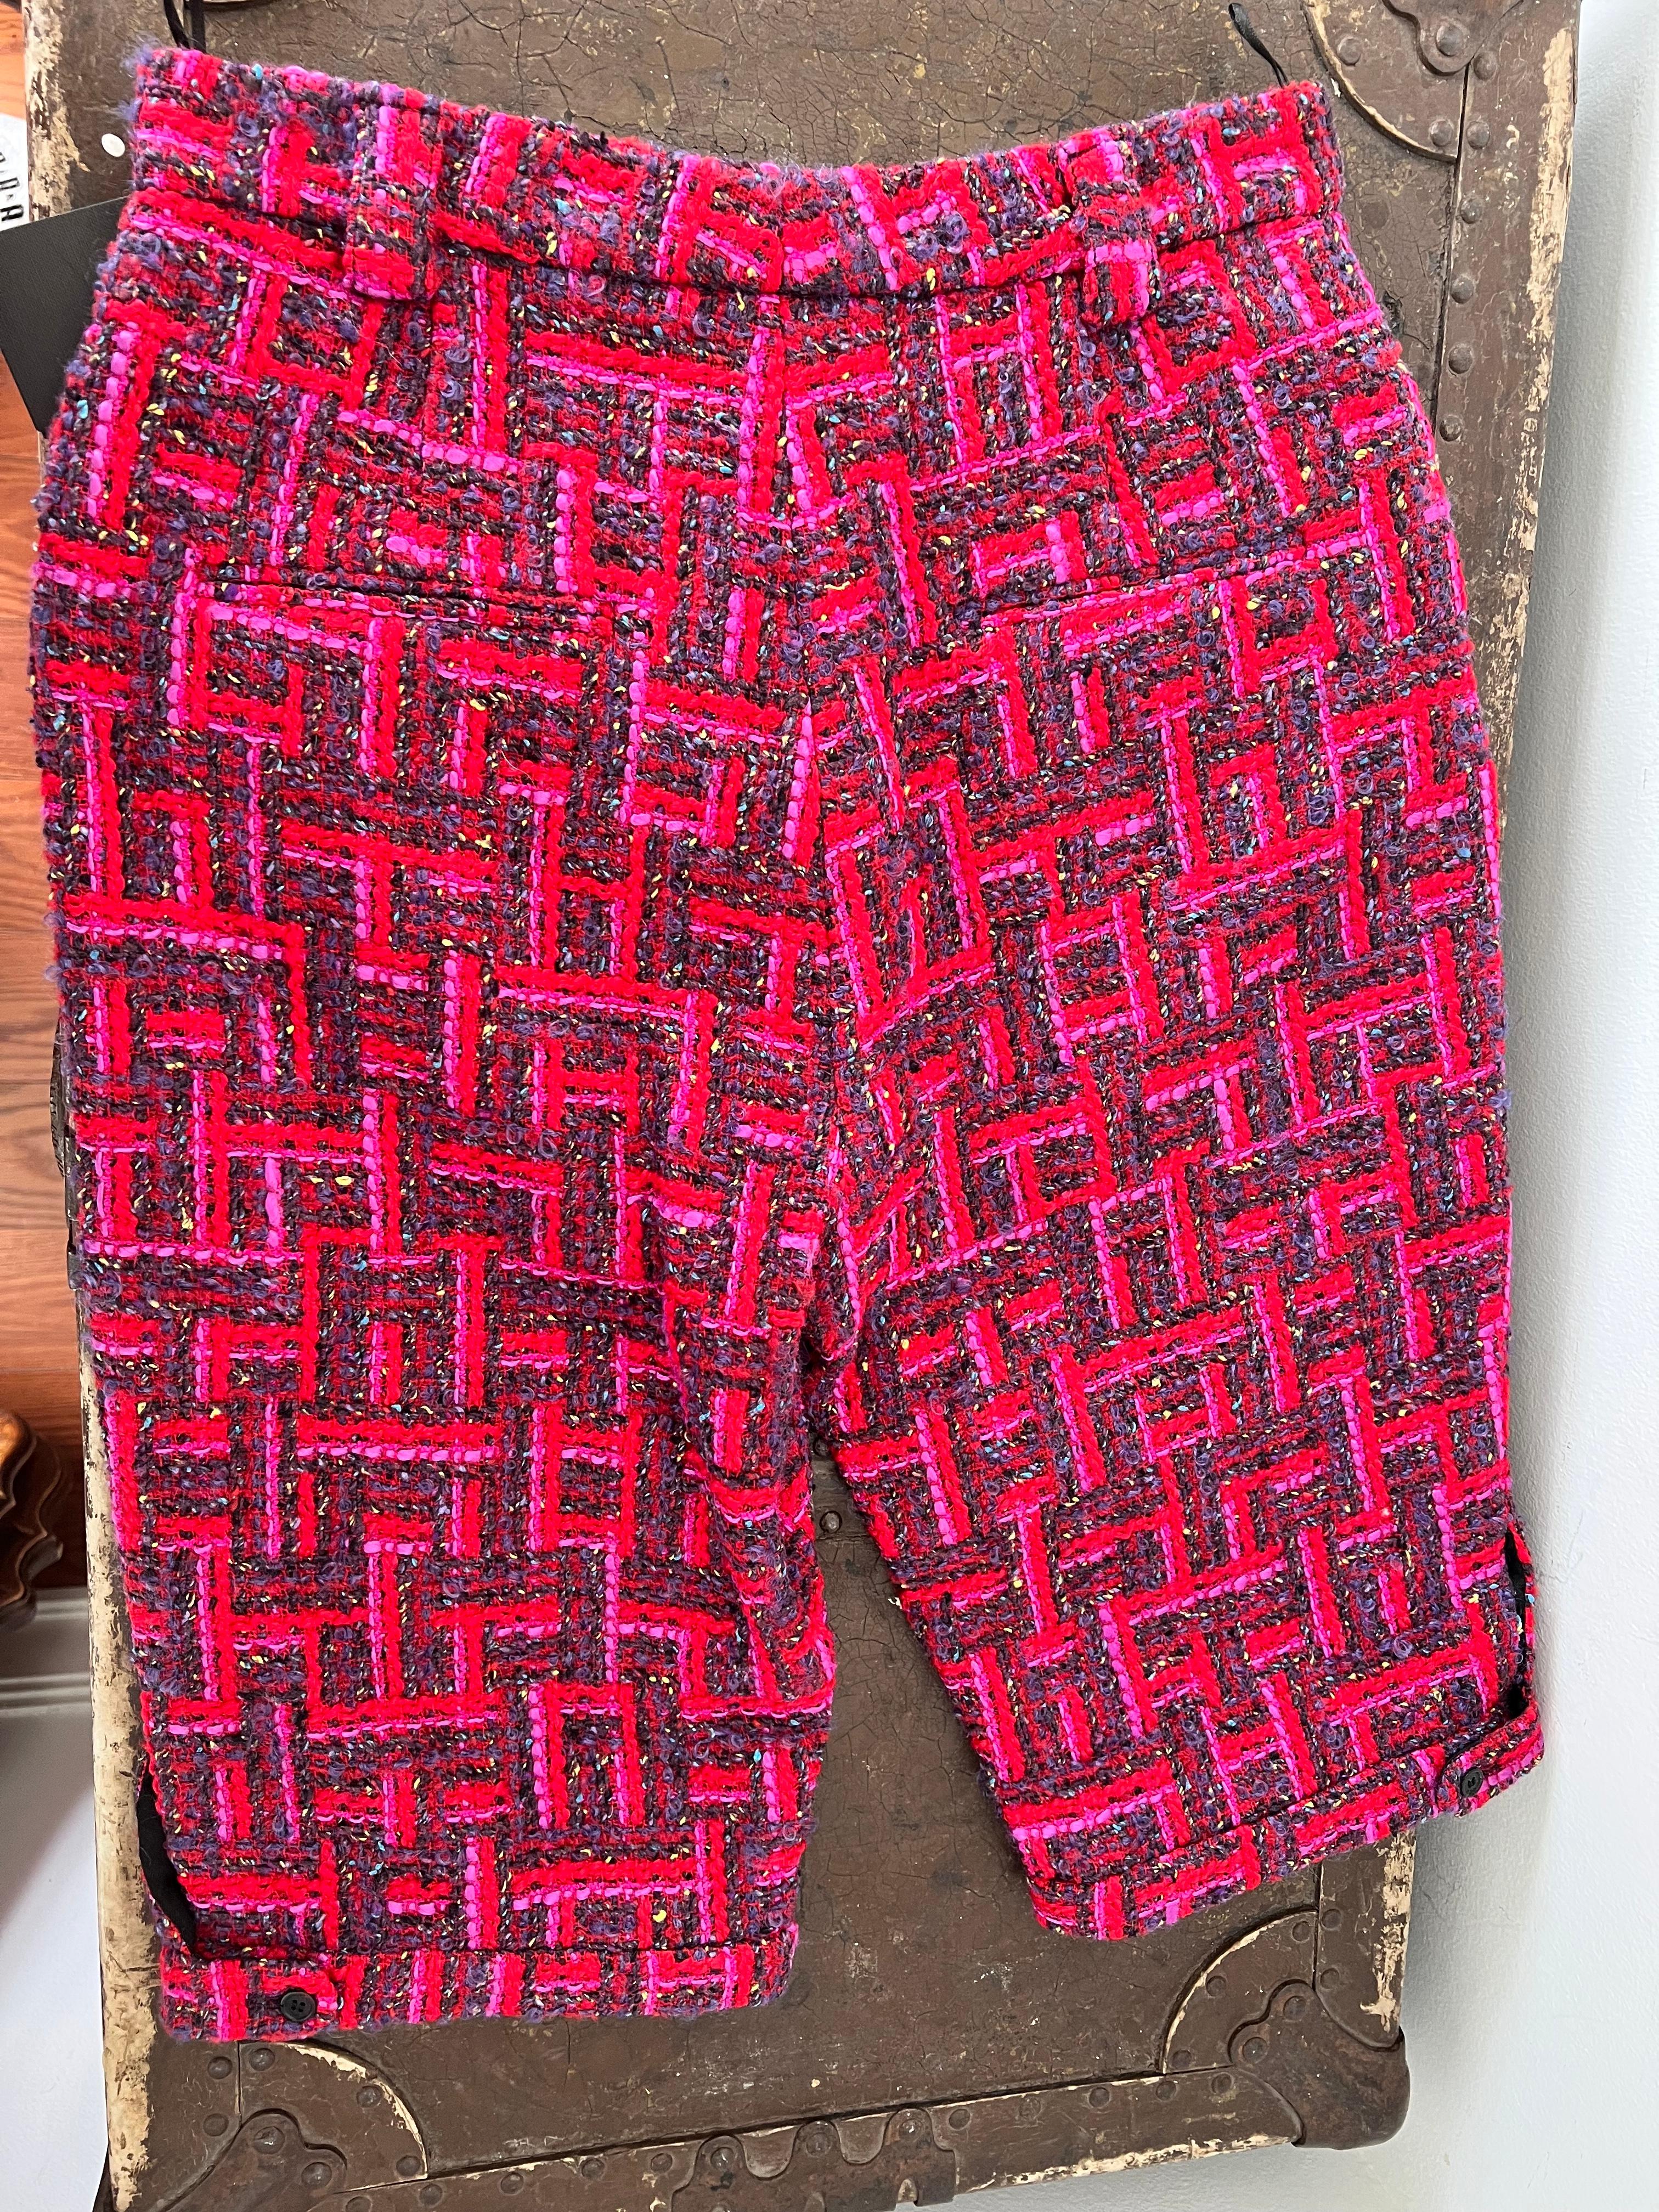 
Saint Laurent's Fuchsia Tweed Shorts, especially when brand new with tags, represent a perfect blend of sophistication and a vibrant pop of color. The house of Saint Laurent is known for its timeless elegance and cutting-edge style, and these